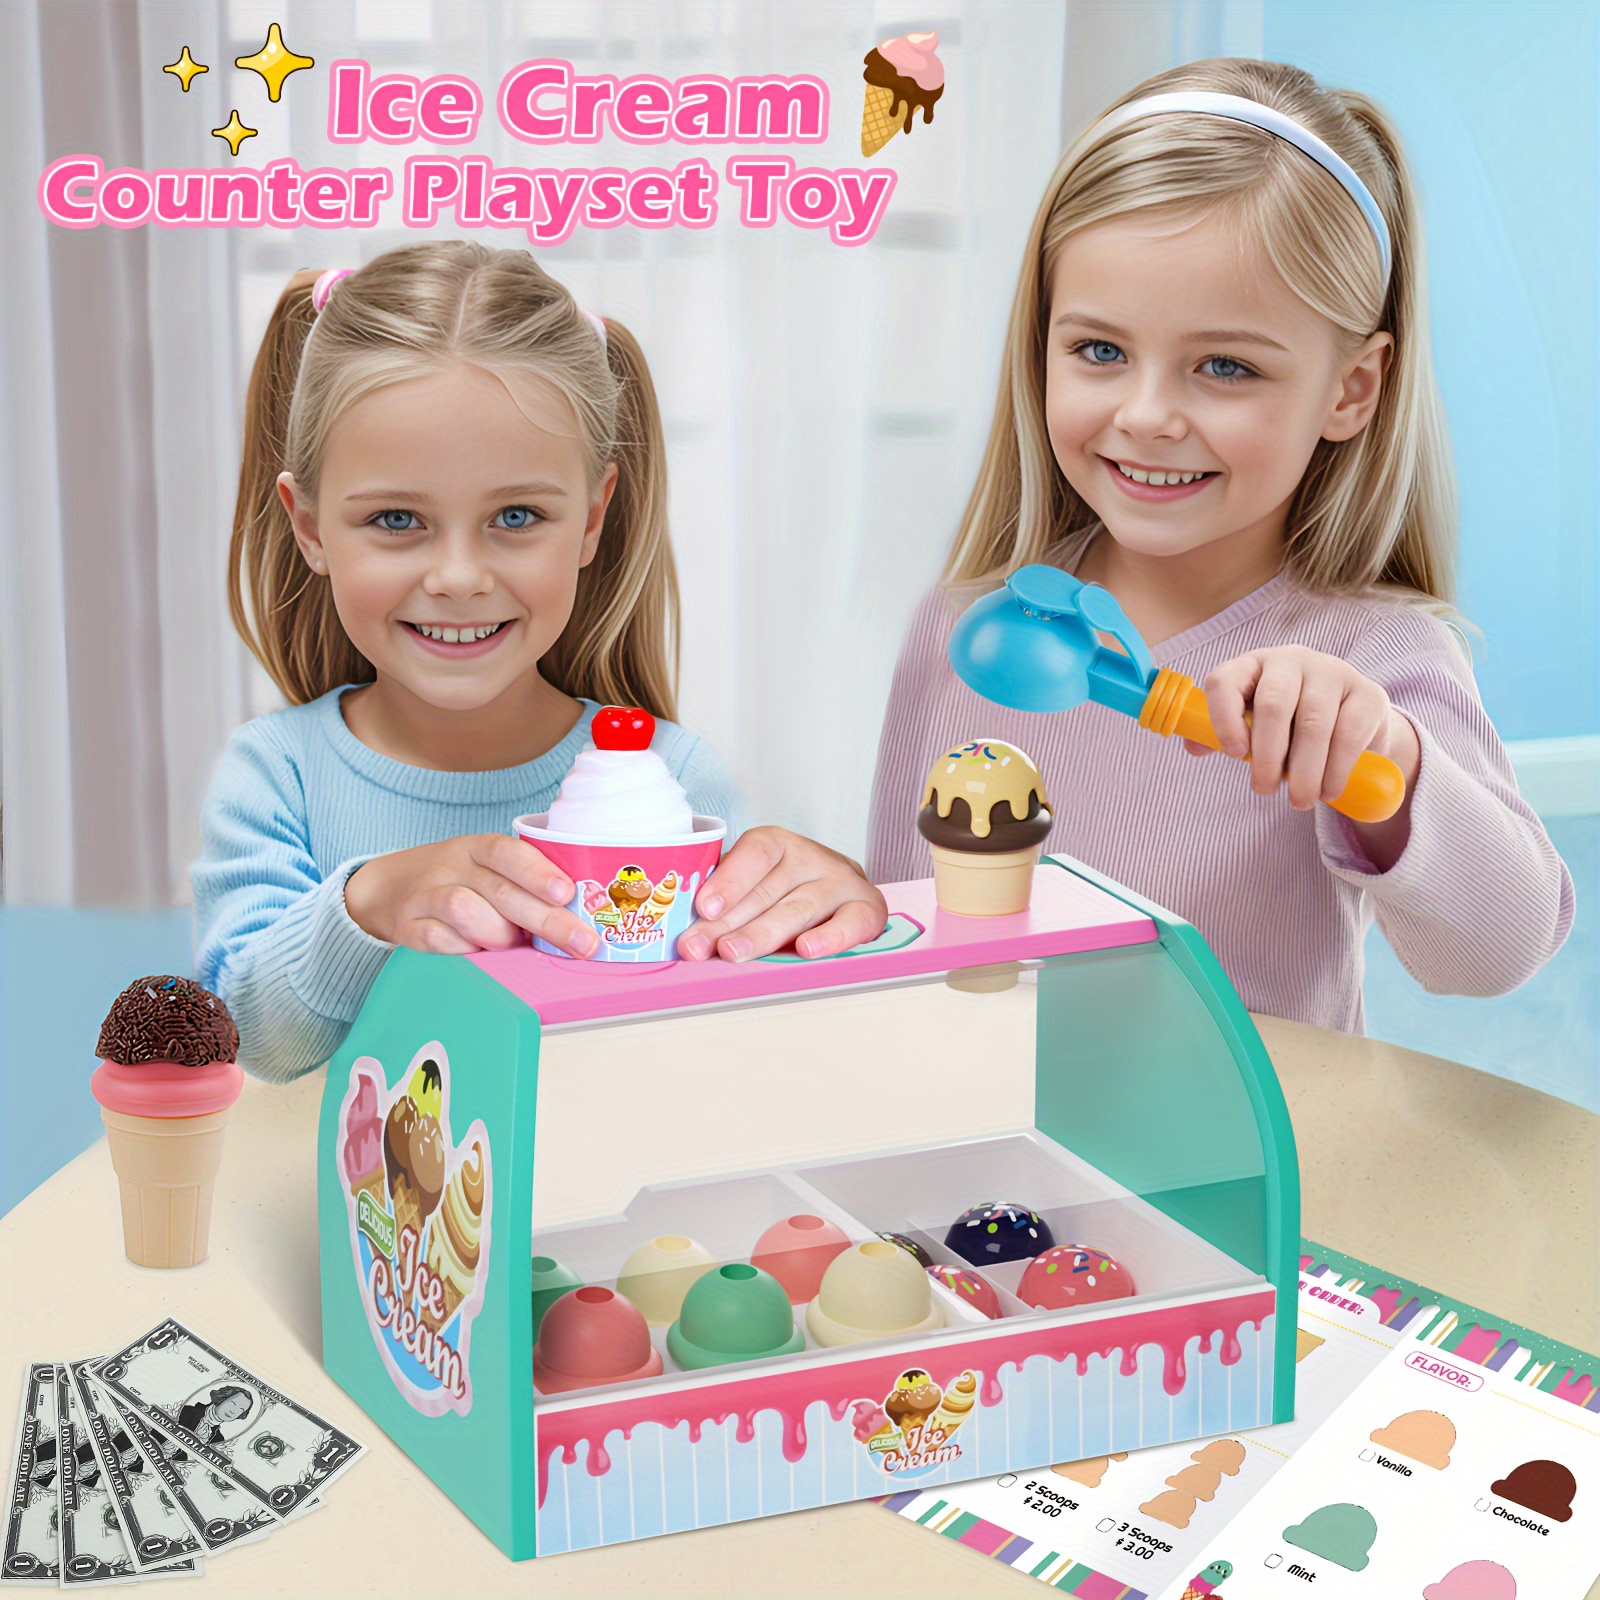 

Ice Cream Counter Playset For Kids, Pretend Play Best Gift For Girl Or Boy, Play Food Scoop And Serve, Toddler Toy